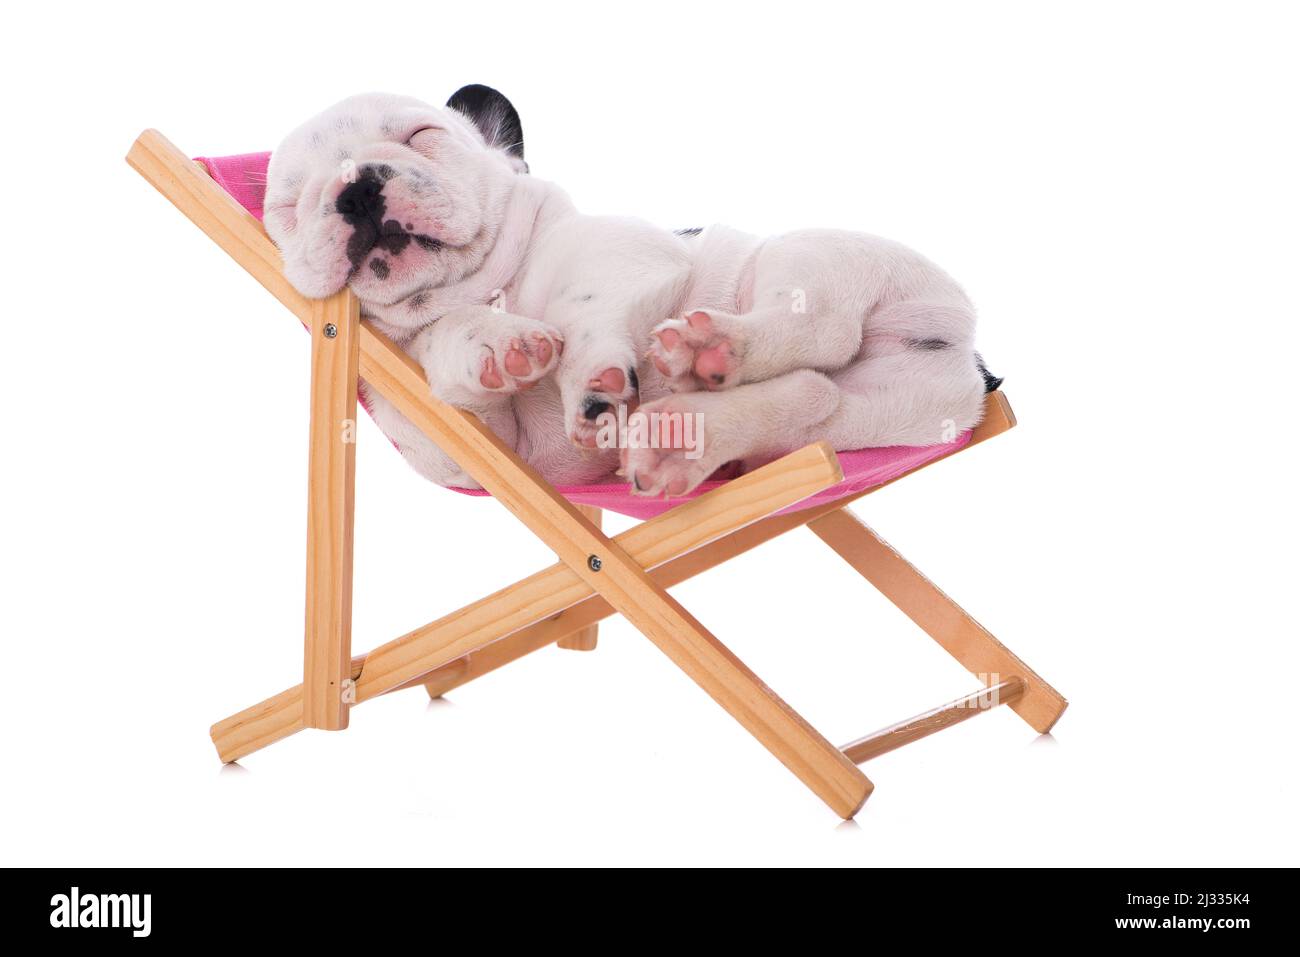 Sleeping puppy in a deck chair Stock Photo